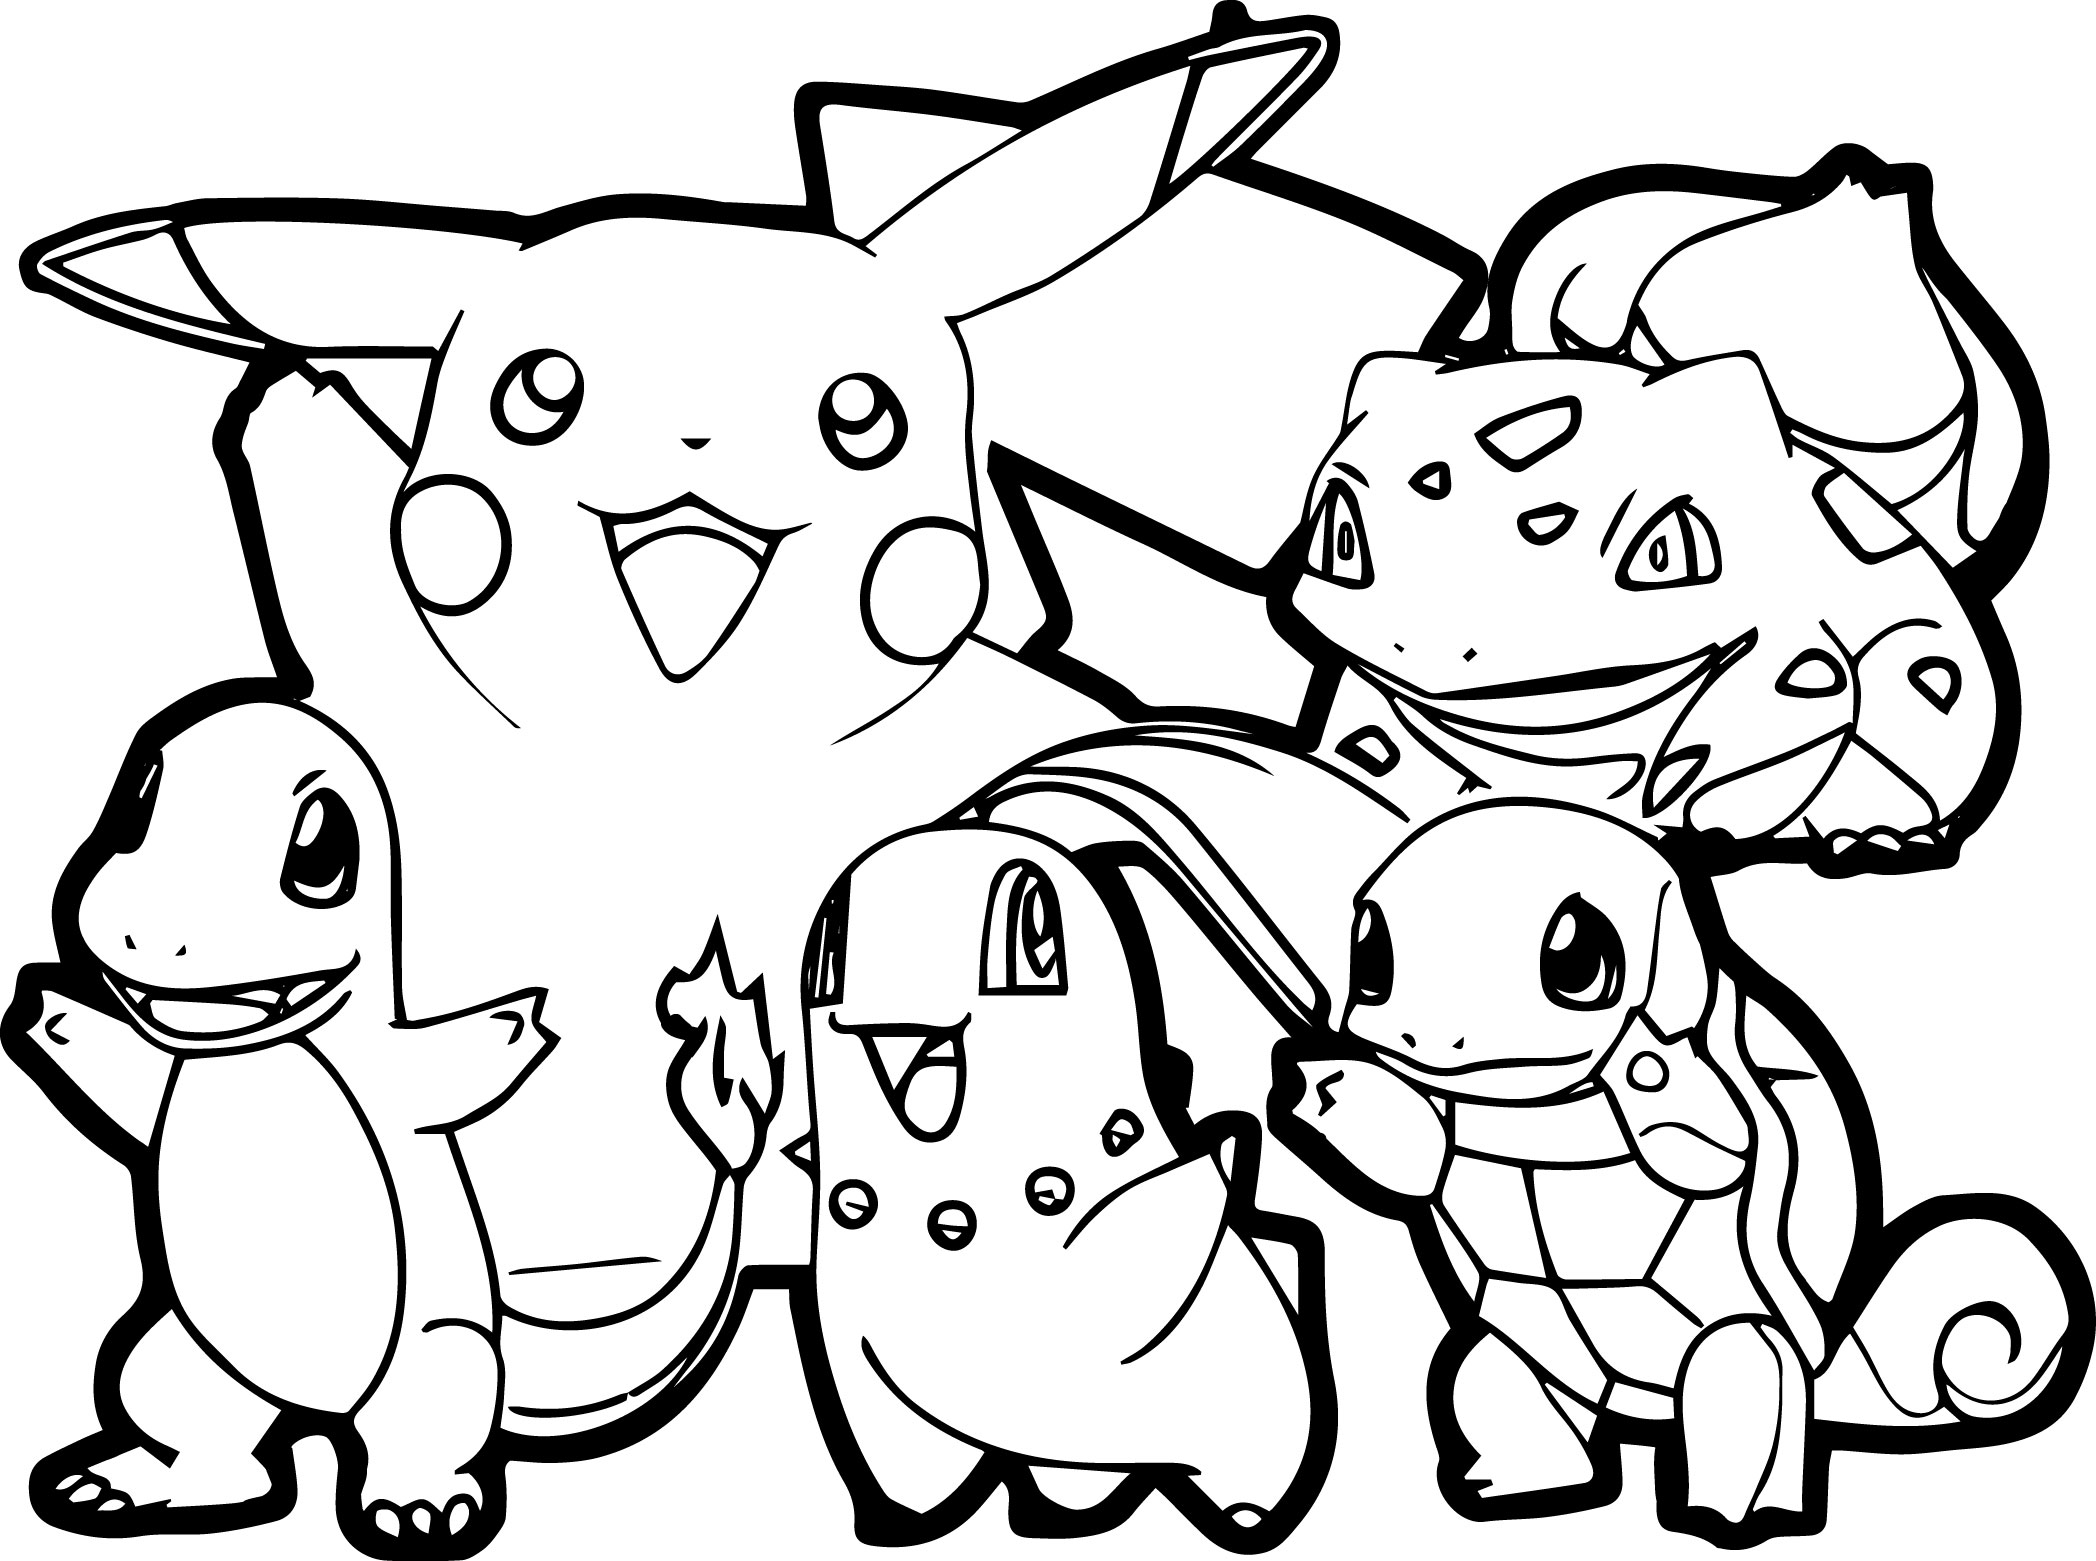 A simple coloring page of Pikachu and his friends, with very thick lines.